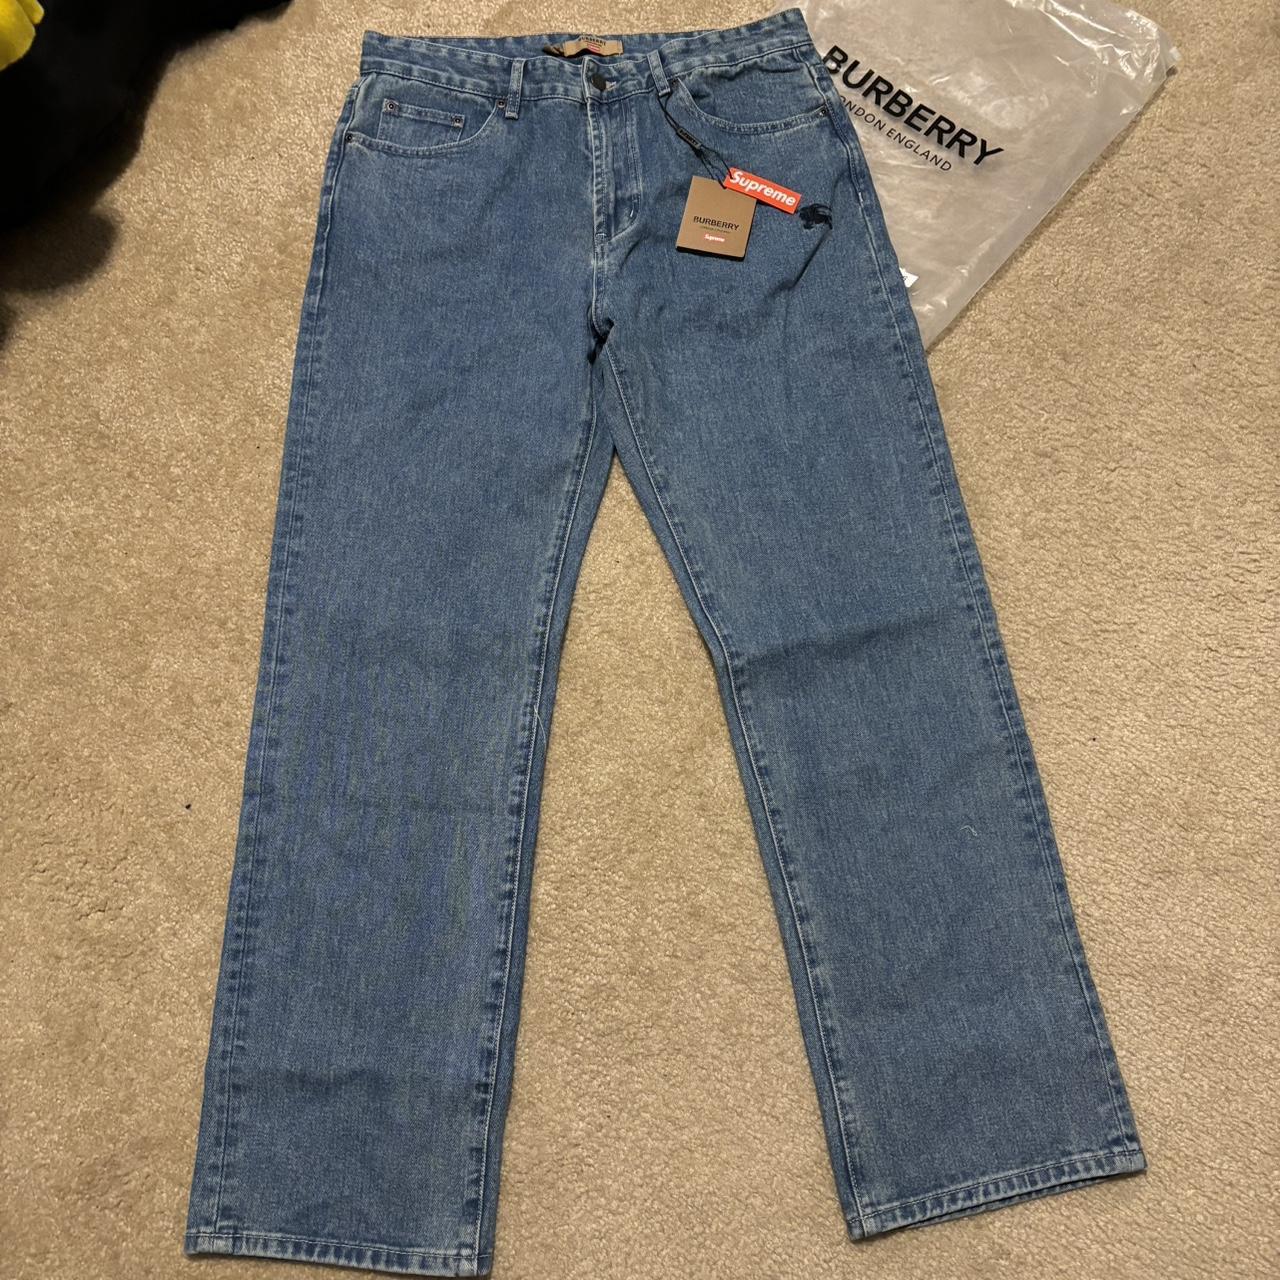 Supreme X Burberry loose fit jeans, Size 36, Tried on...